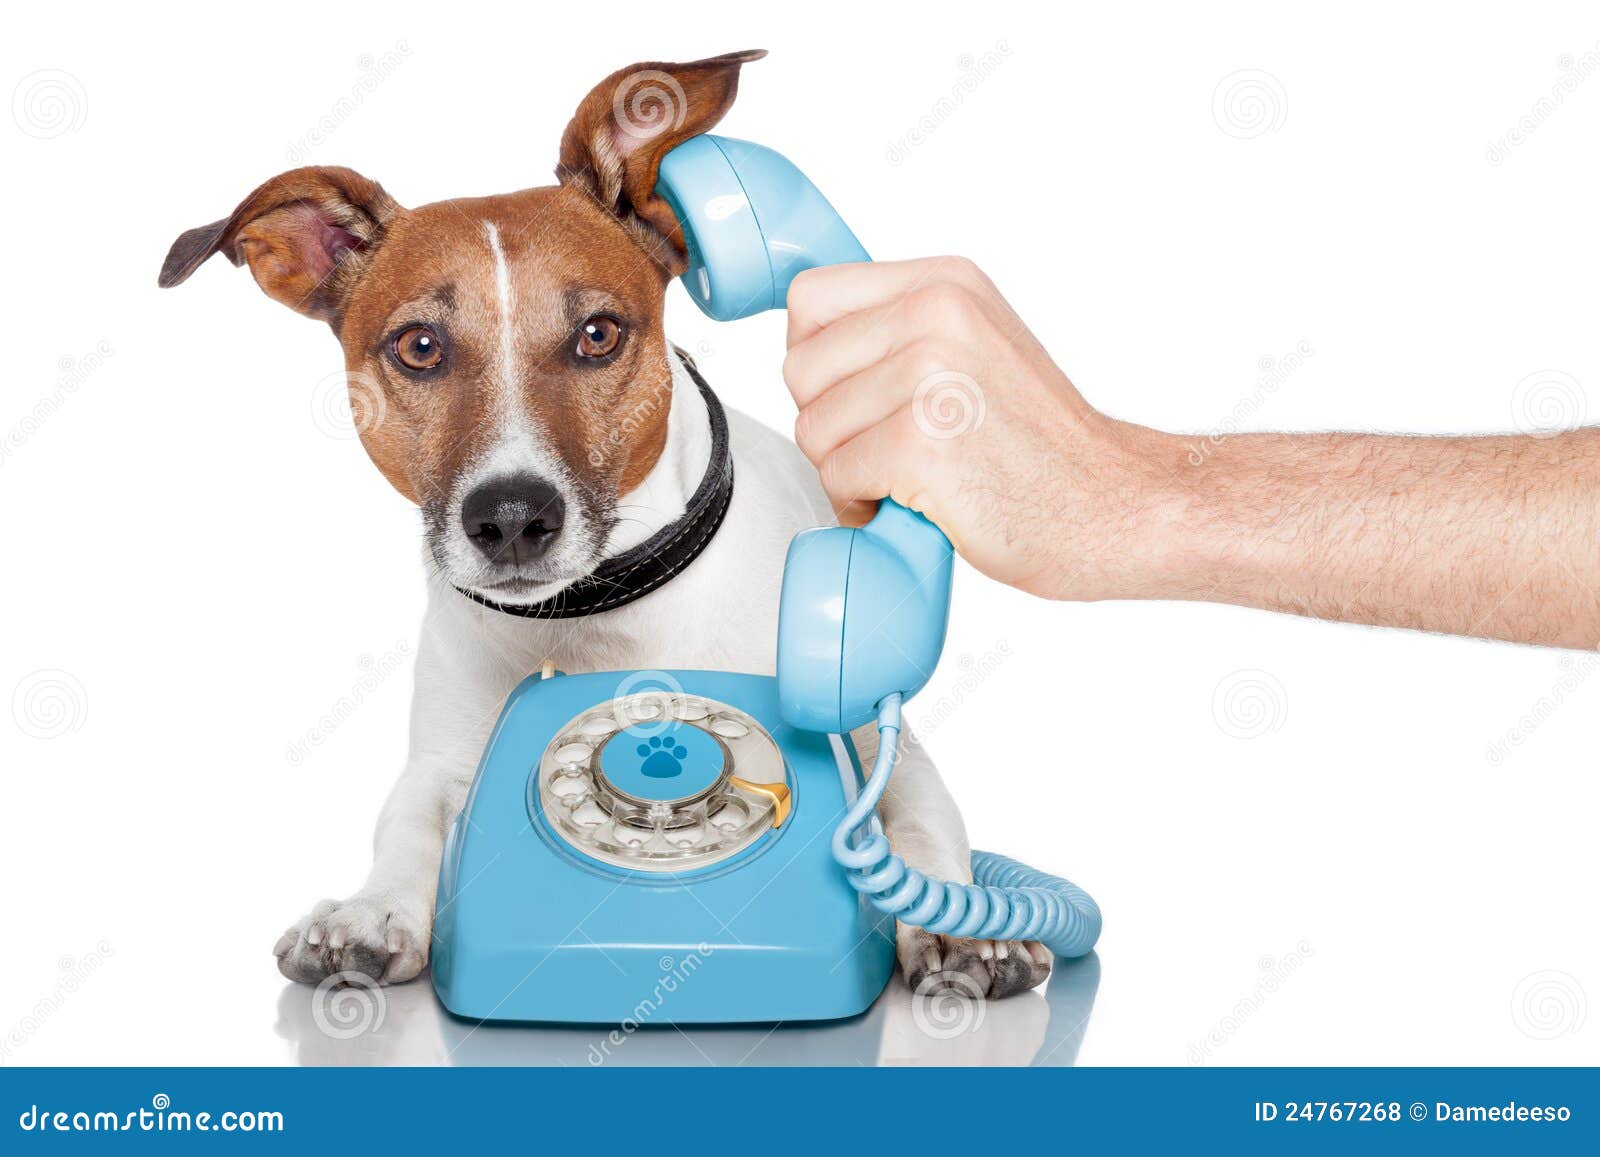 Vintage Dog Making Phone Call PHOTO Funny 1900s Puppy Playing Cell Phone Puppies 